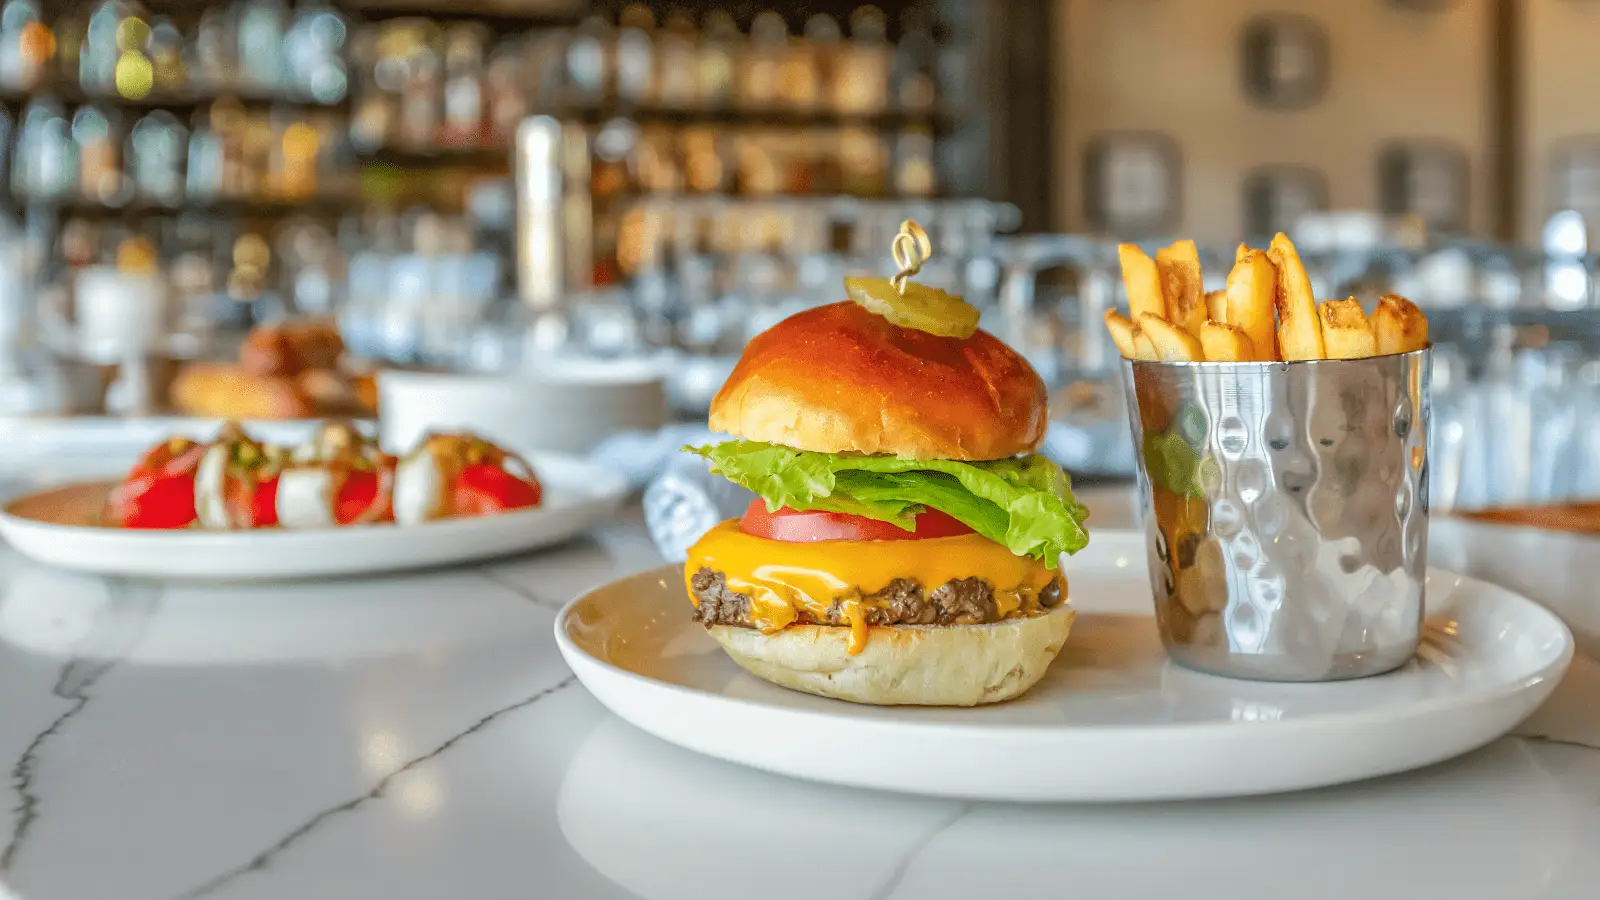 A cheeseburger with a lettuce leaf, tomato slice, cheese, and pickles on a bun is served on a white plate next to a small metal cup filled with French fries. In the background, out-of-focus plates of food and a bar shelf with bottles are visible—one of the best things to do in Sonoma County this February.